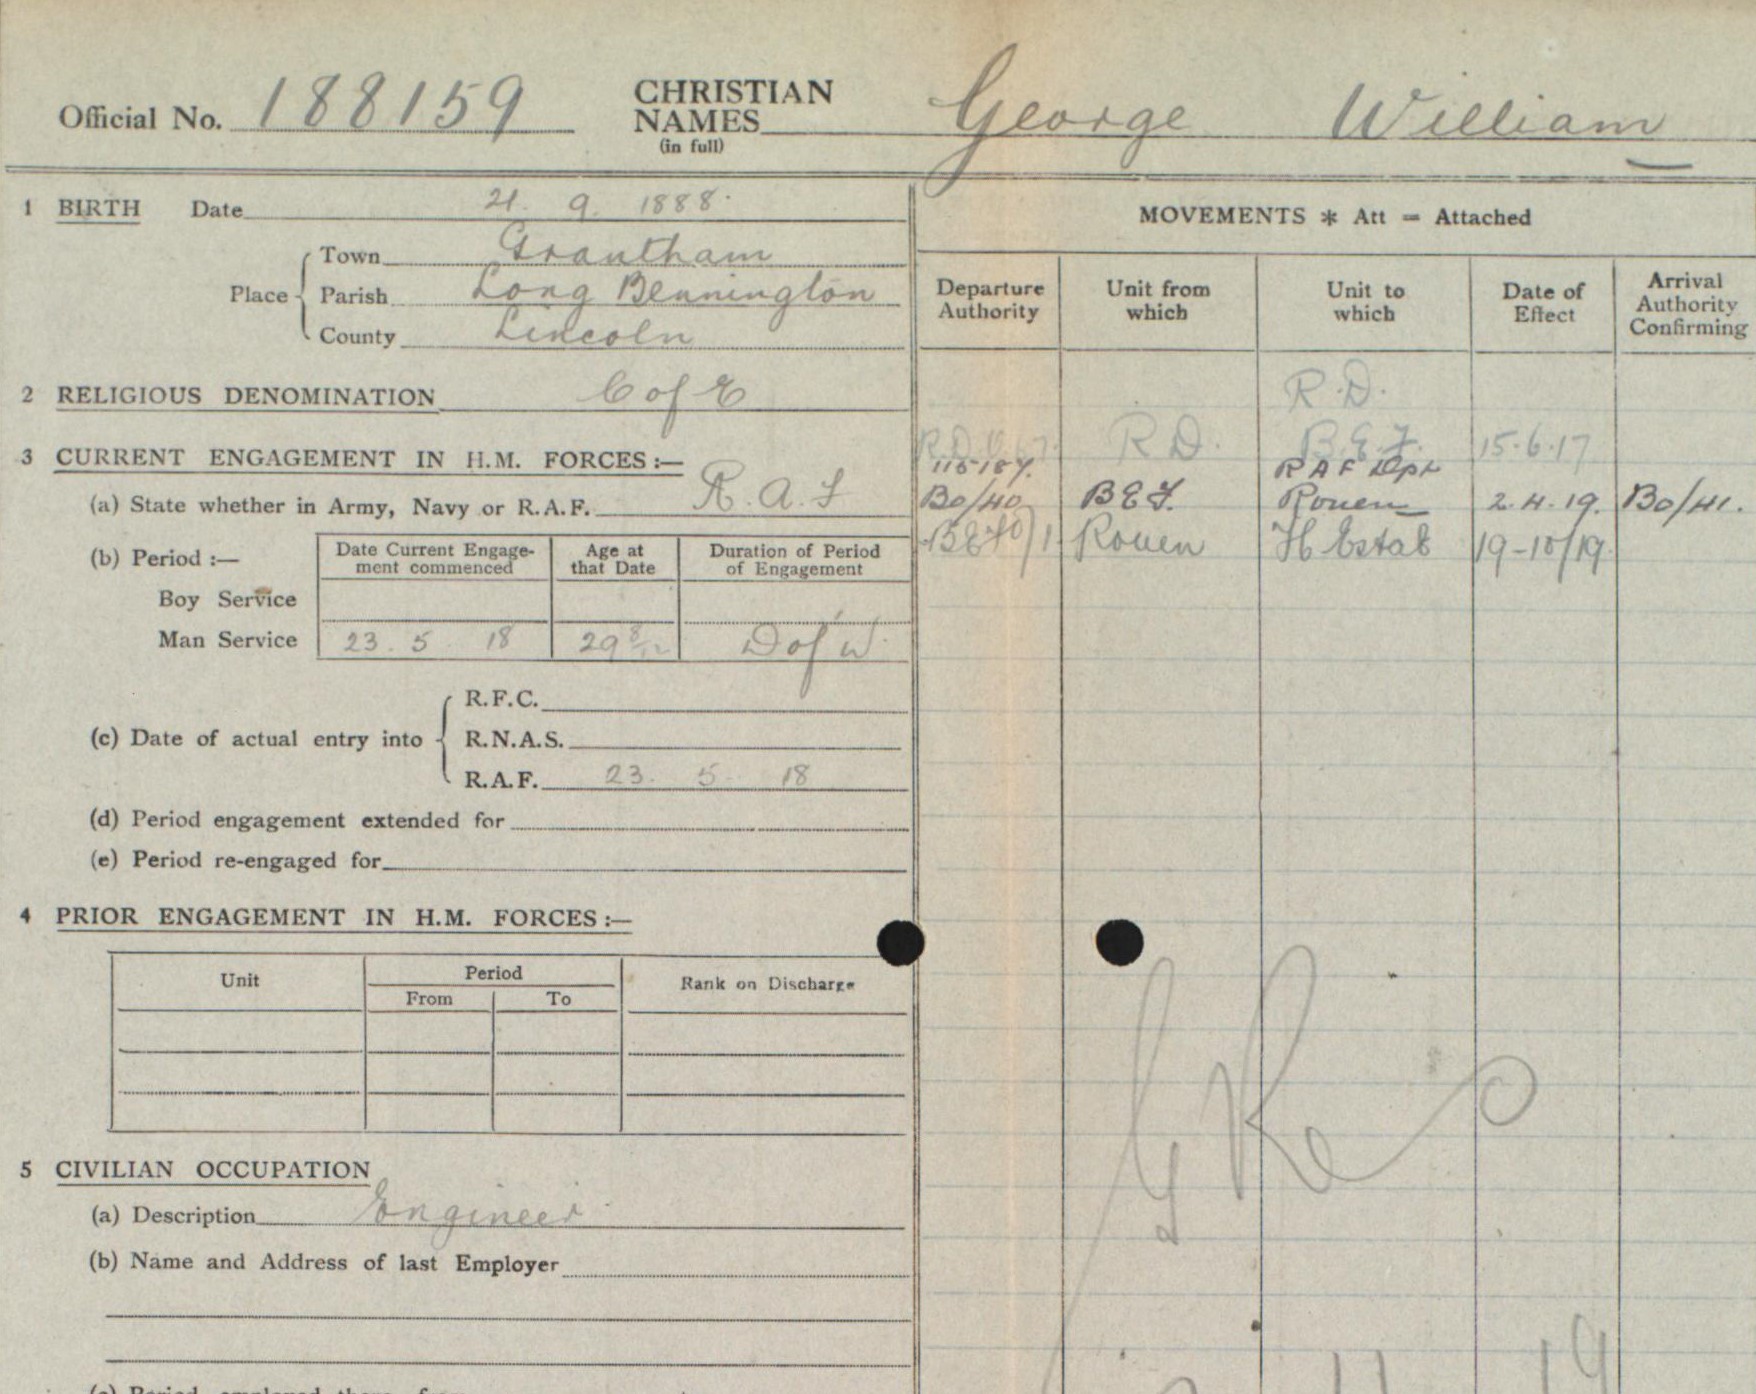 Extract from FWW RAF service record